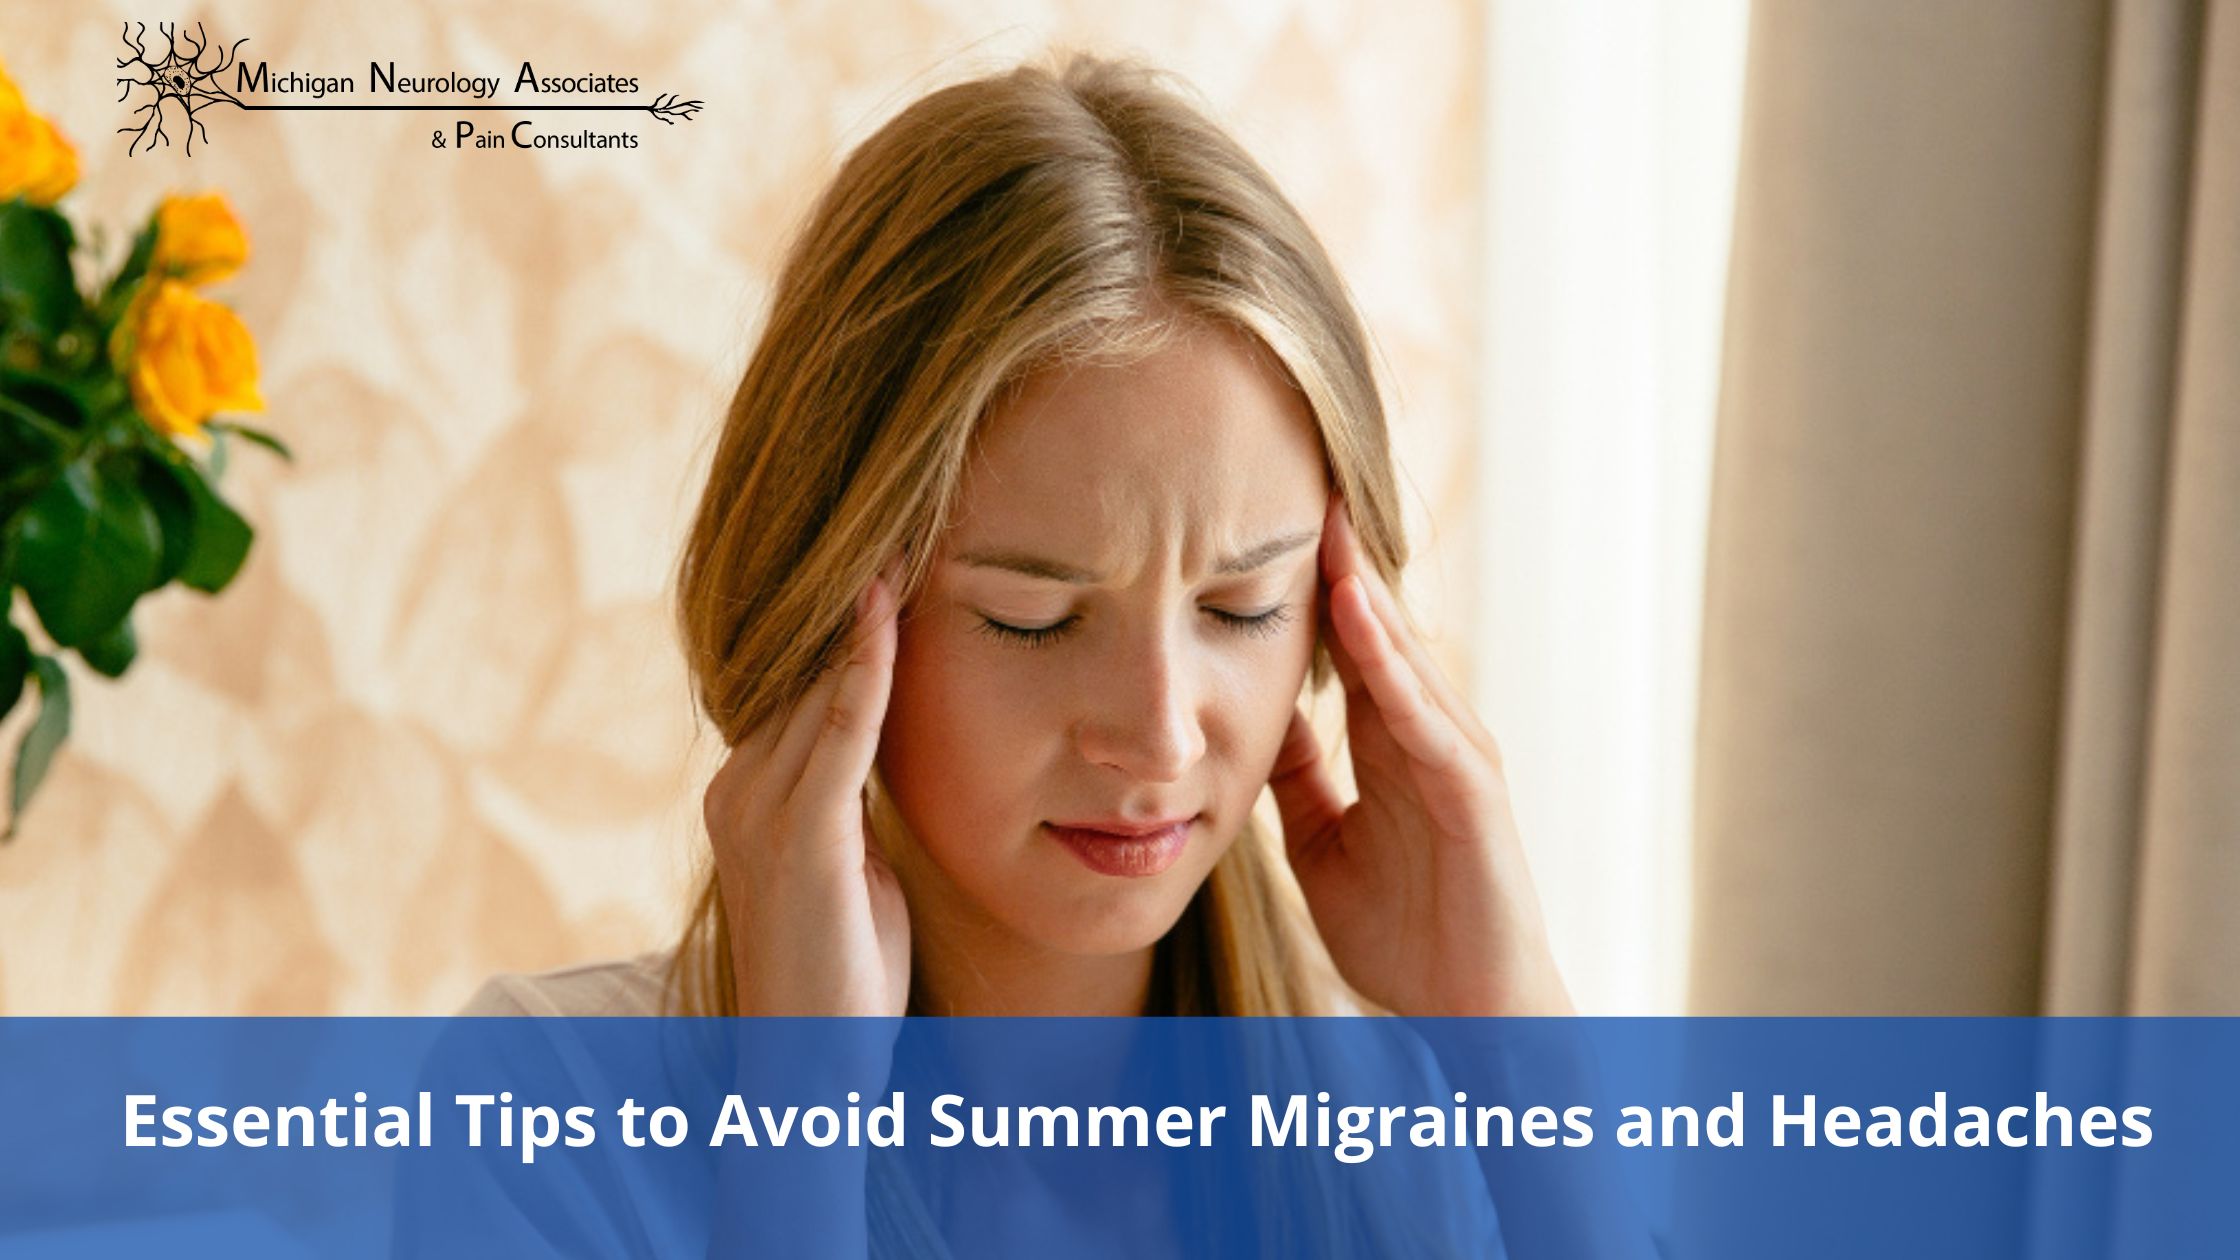 Essential Tips to Avoid Summer Migraines and Headaches